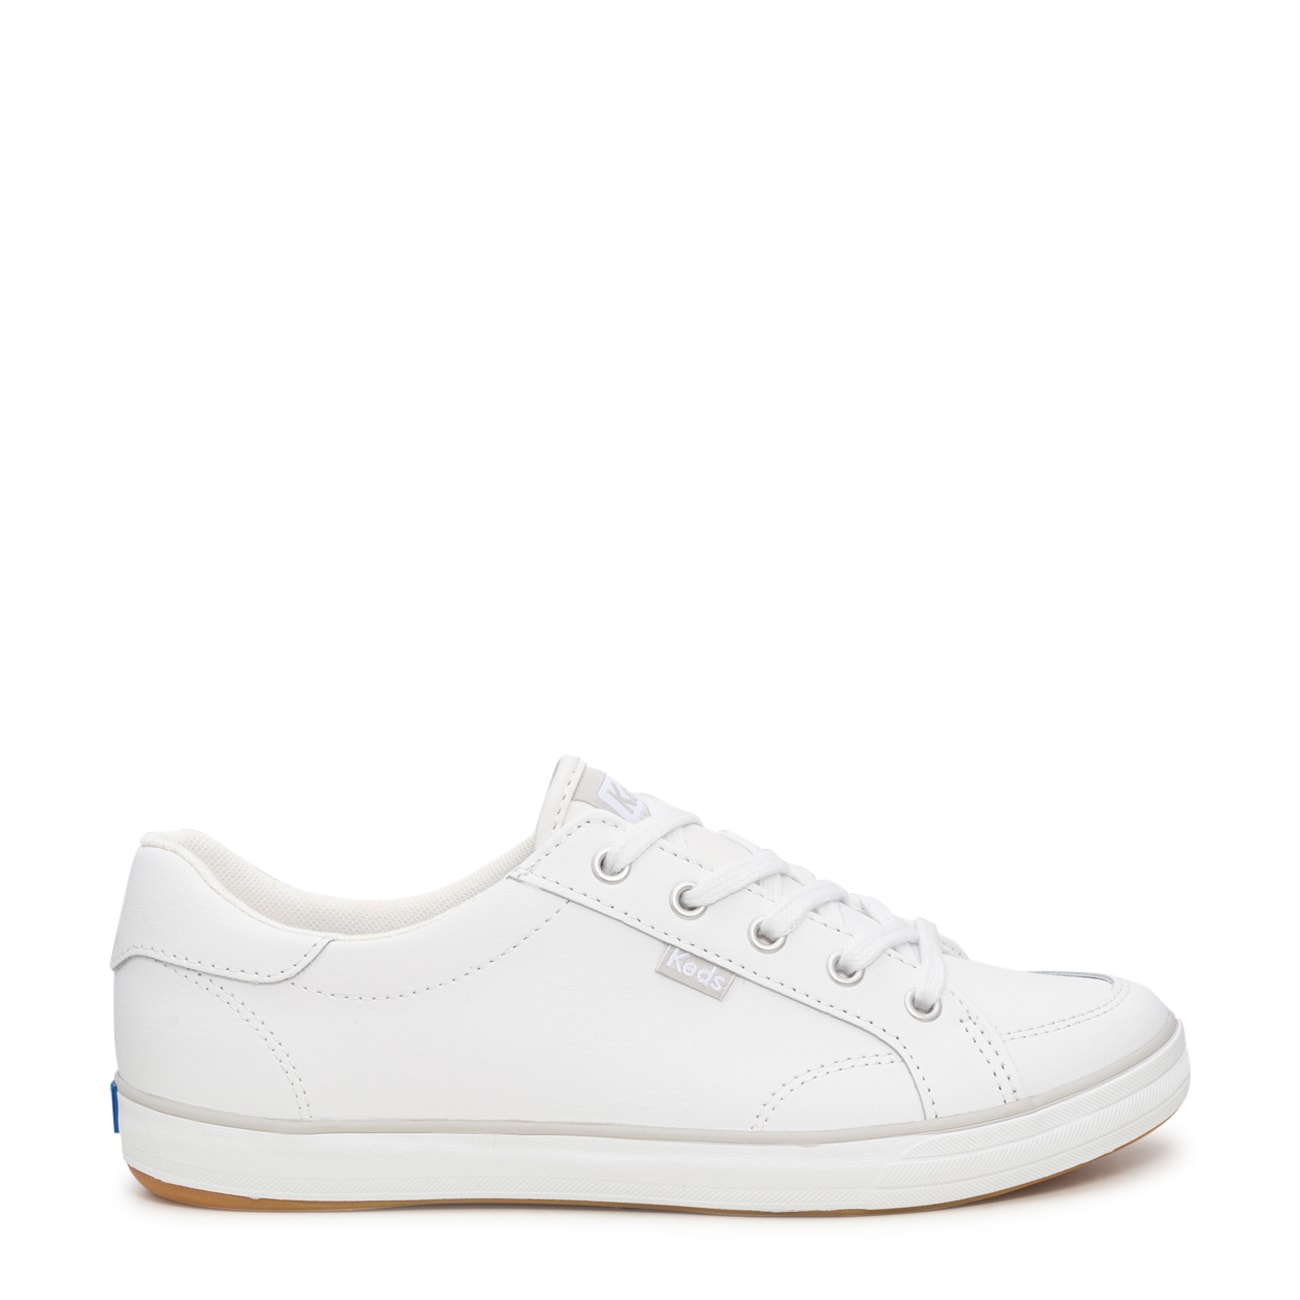 Women's White Shoes in Sizes 3-9